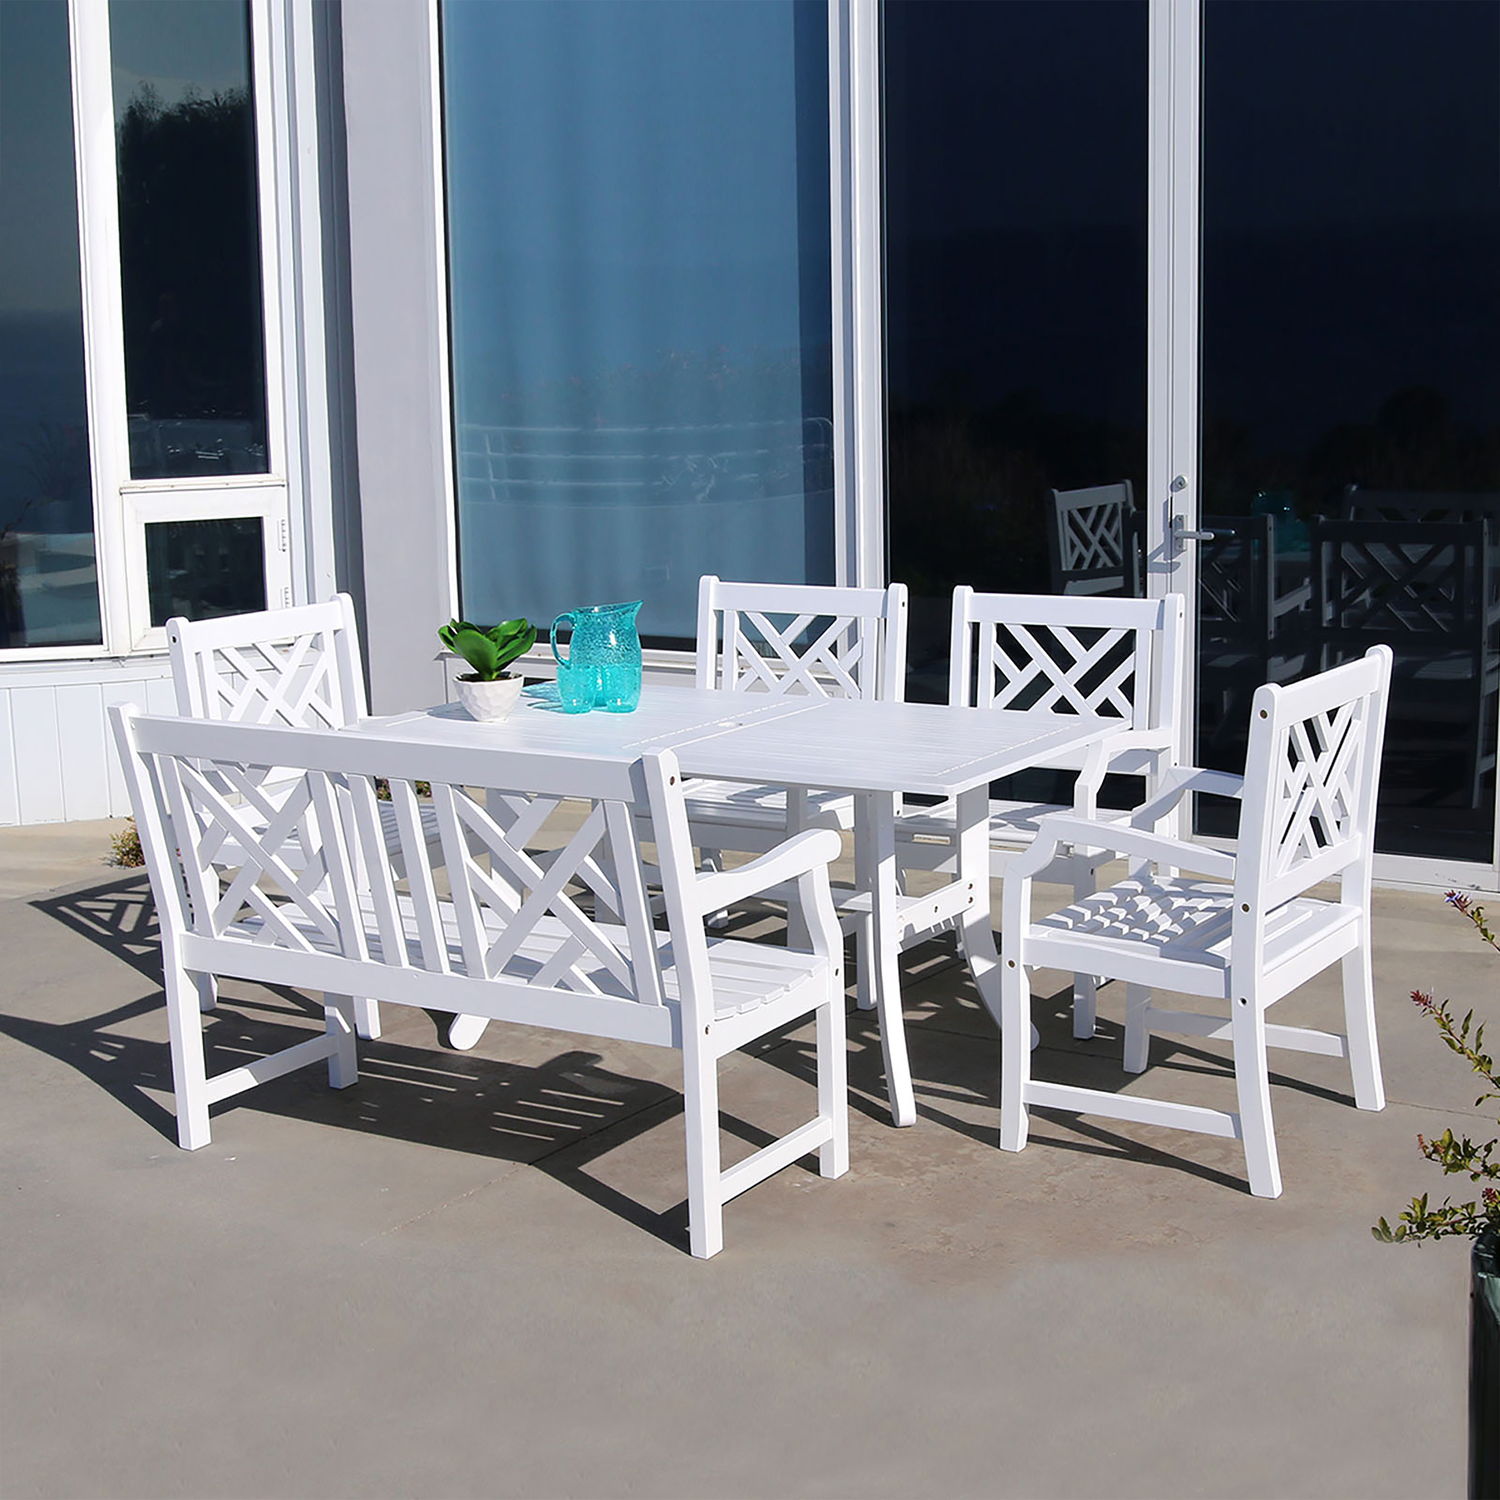 Bradley Outdoor 6-piece Wood Patio Dining Set with 4-foot Bench in White